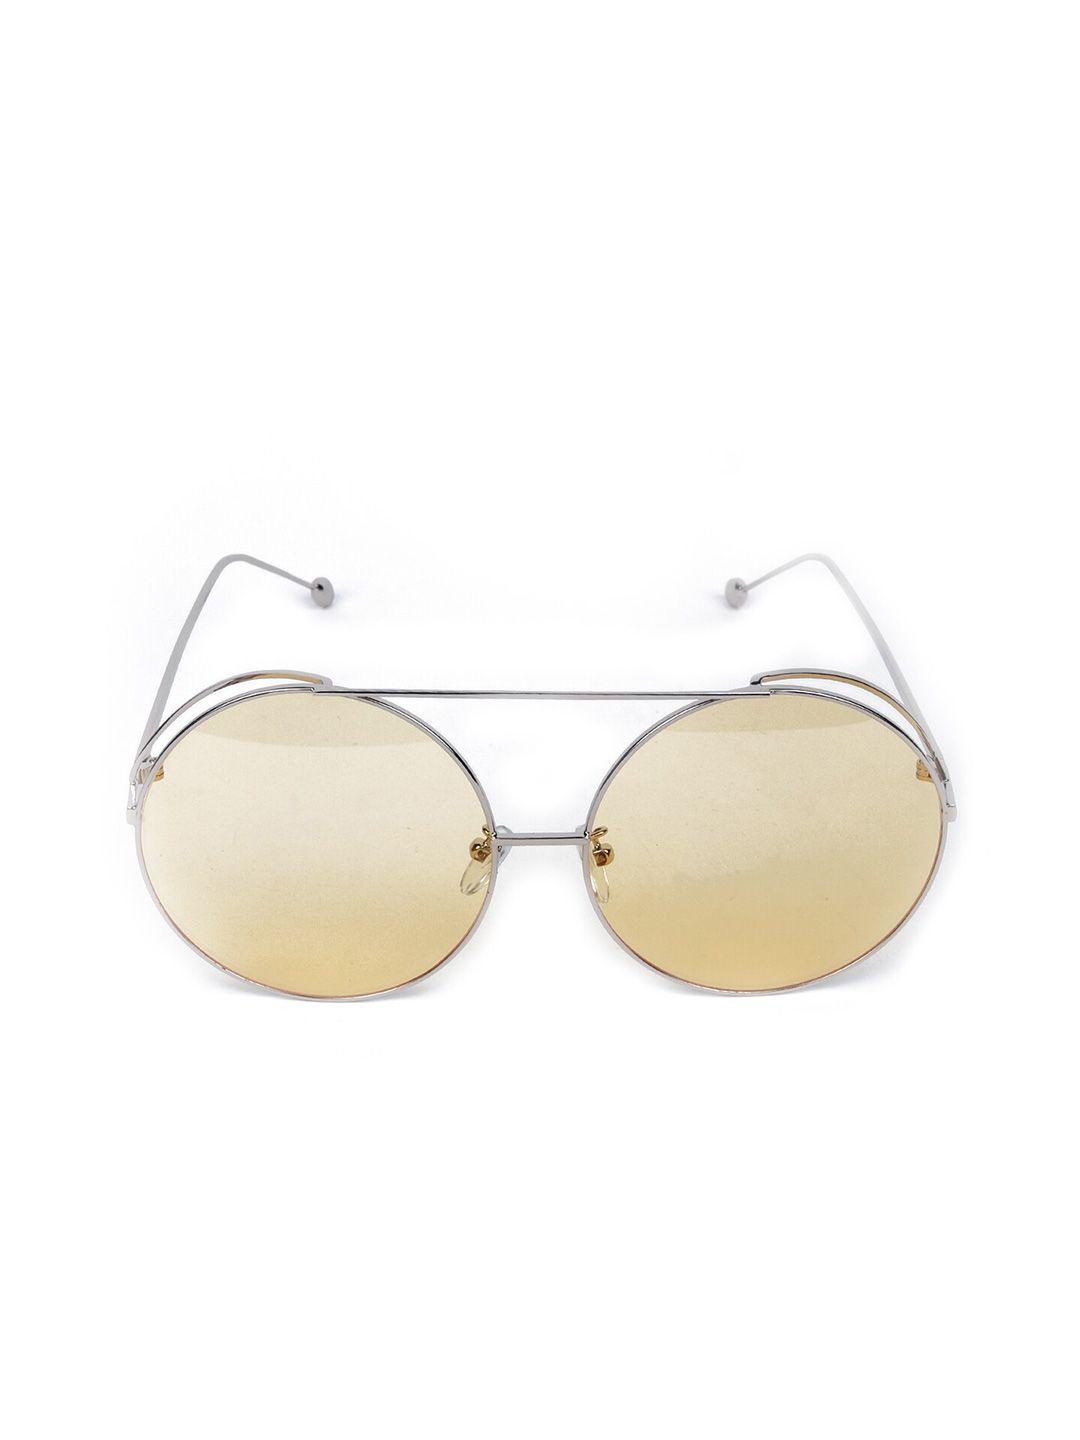 odette women yellow lens & silver-toned round sunglasses with uv protected lens diw241